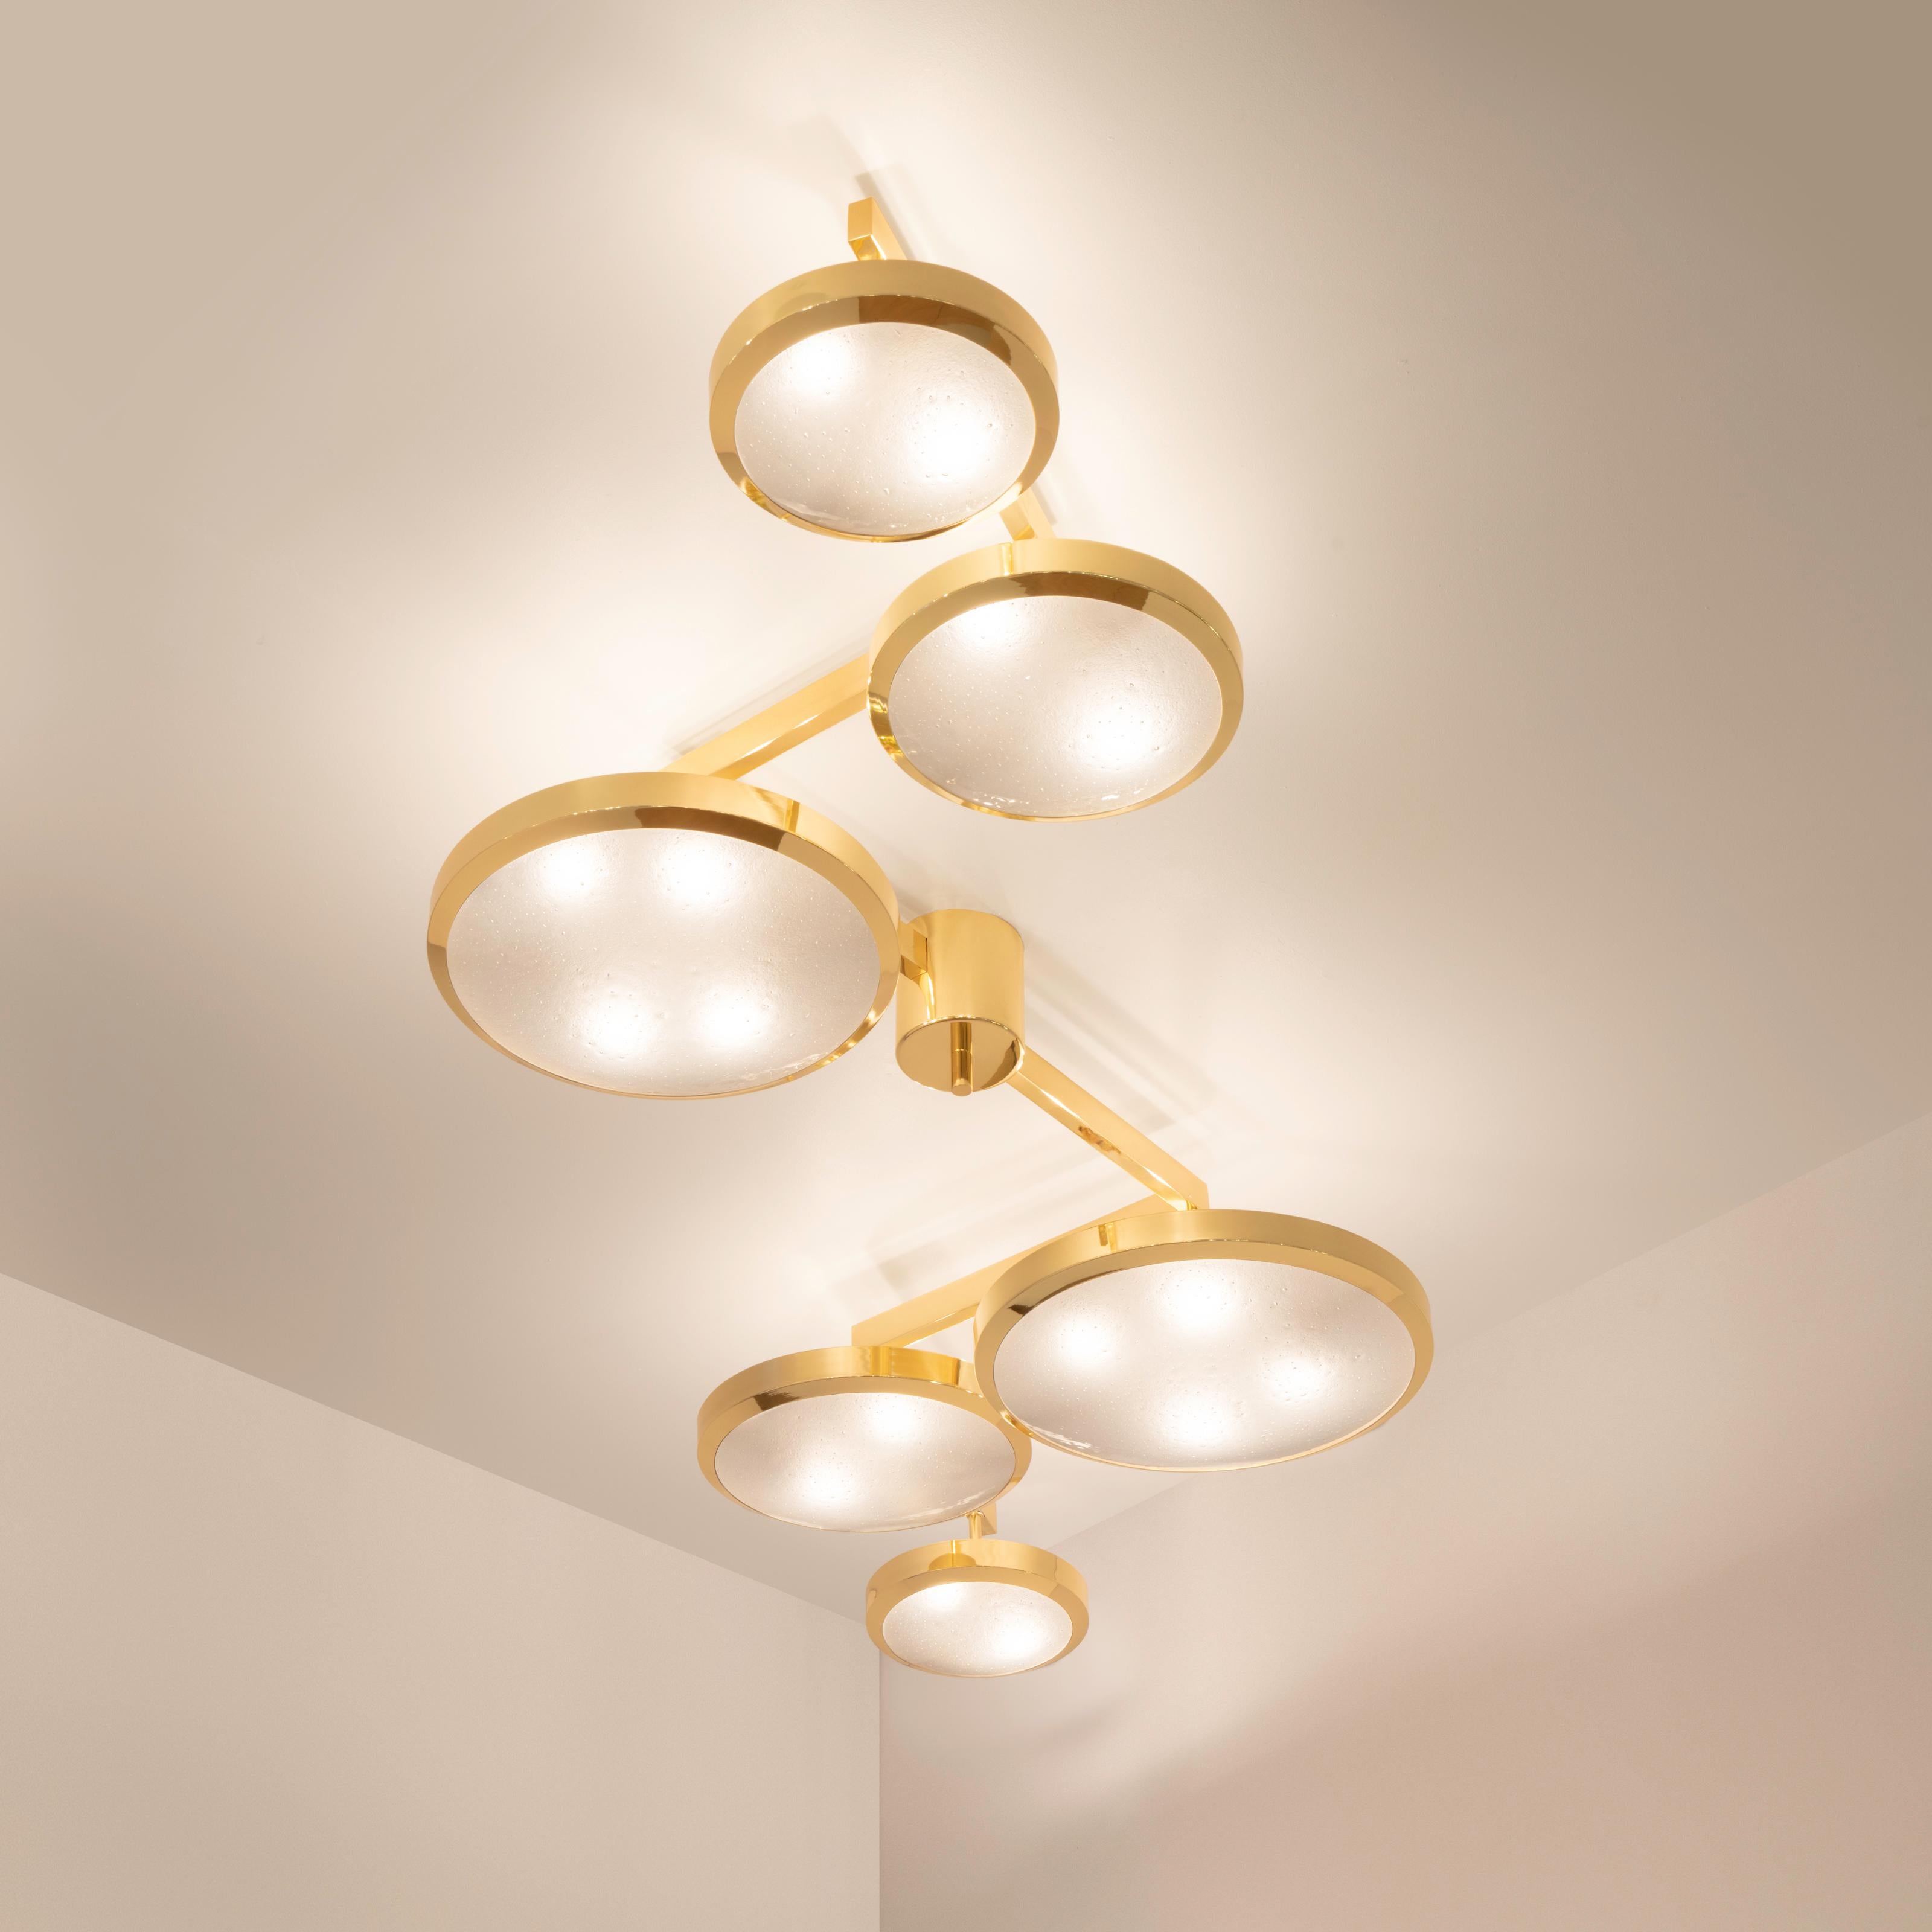 Geometria Sospesa Ceiling Light by Gaspare Asaro-Satin Brass Finish In New Condition For Sale In New York, NY